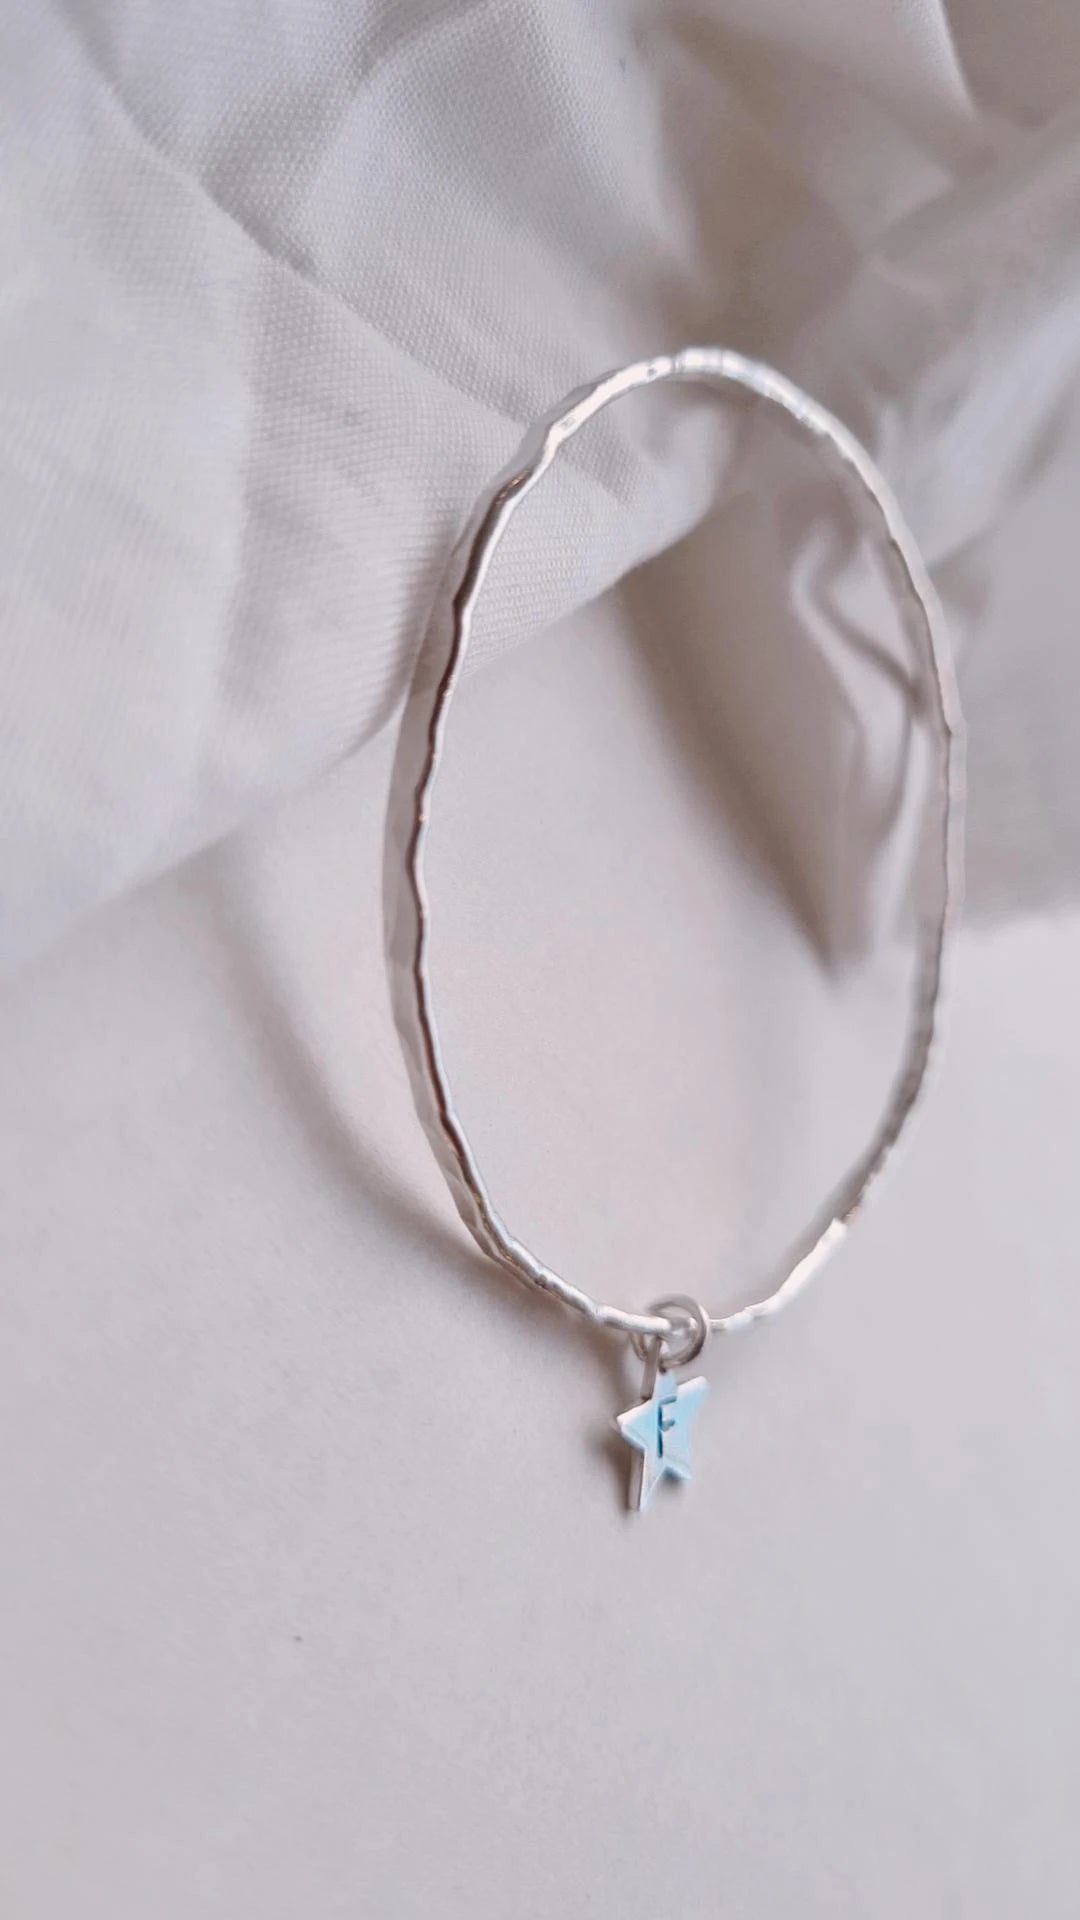 Textured silver bangle with personalised star charm.